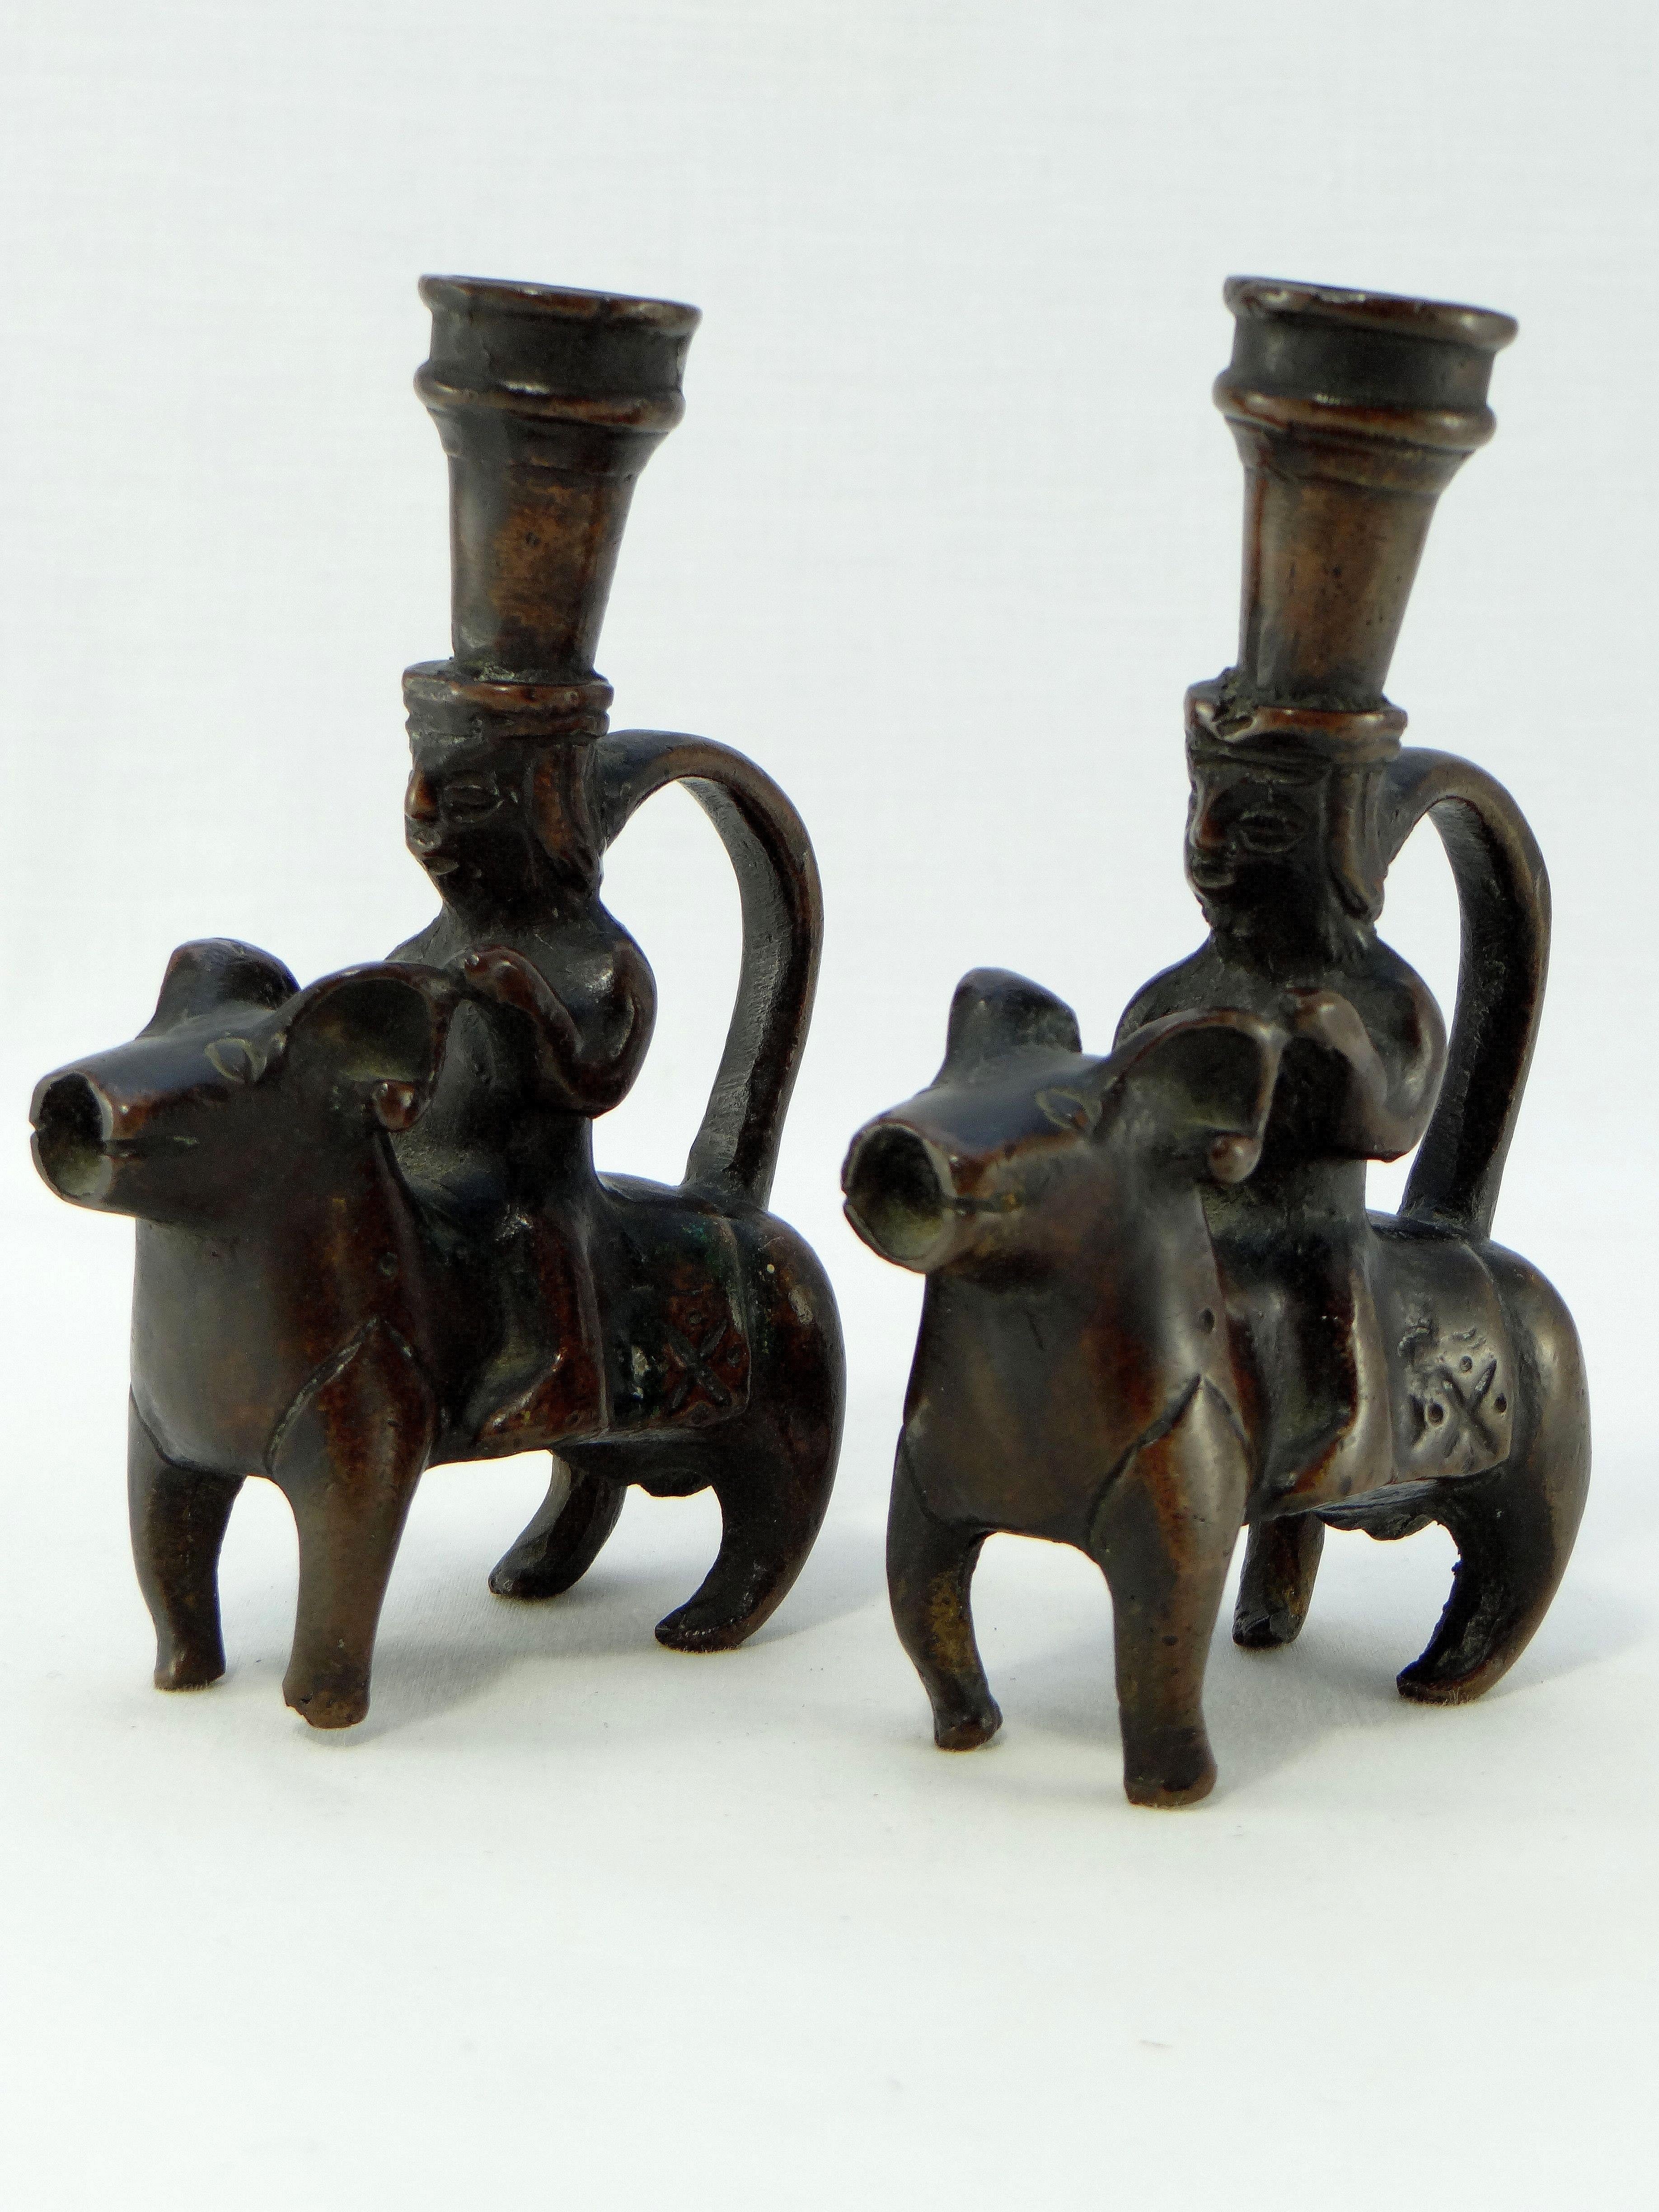 Iran, Khorasan region 18th-19th century, rare and beautiful pair of bronze candlesticks depicting characters riding rams. These animals are stylized in the spirit of the aquamaniles of the twelfth / thirteenth centuries. These pieces come from the